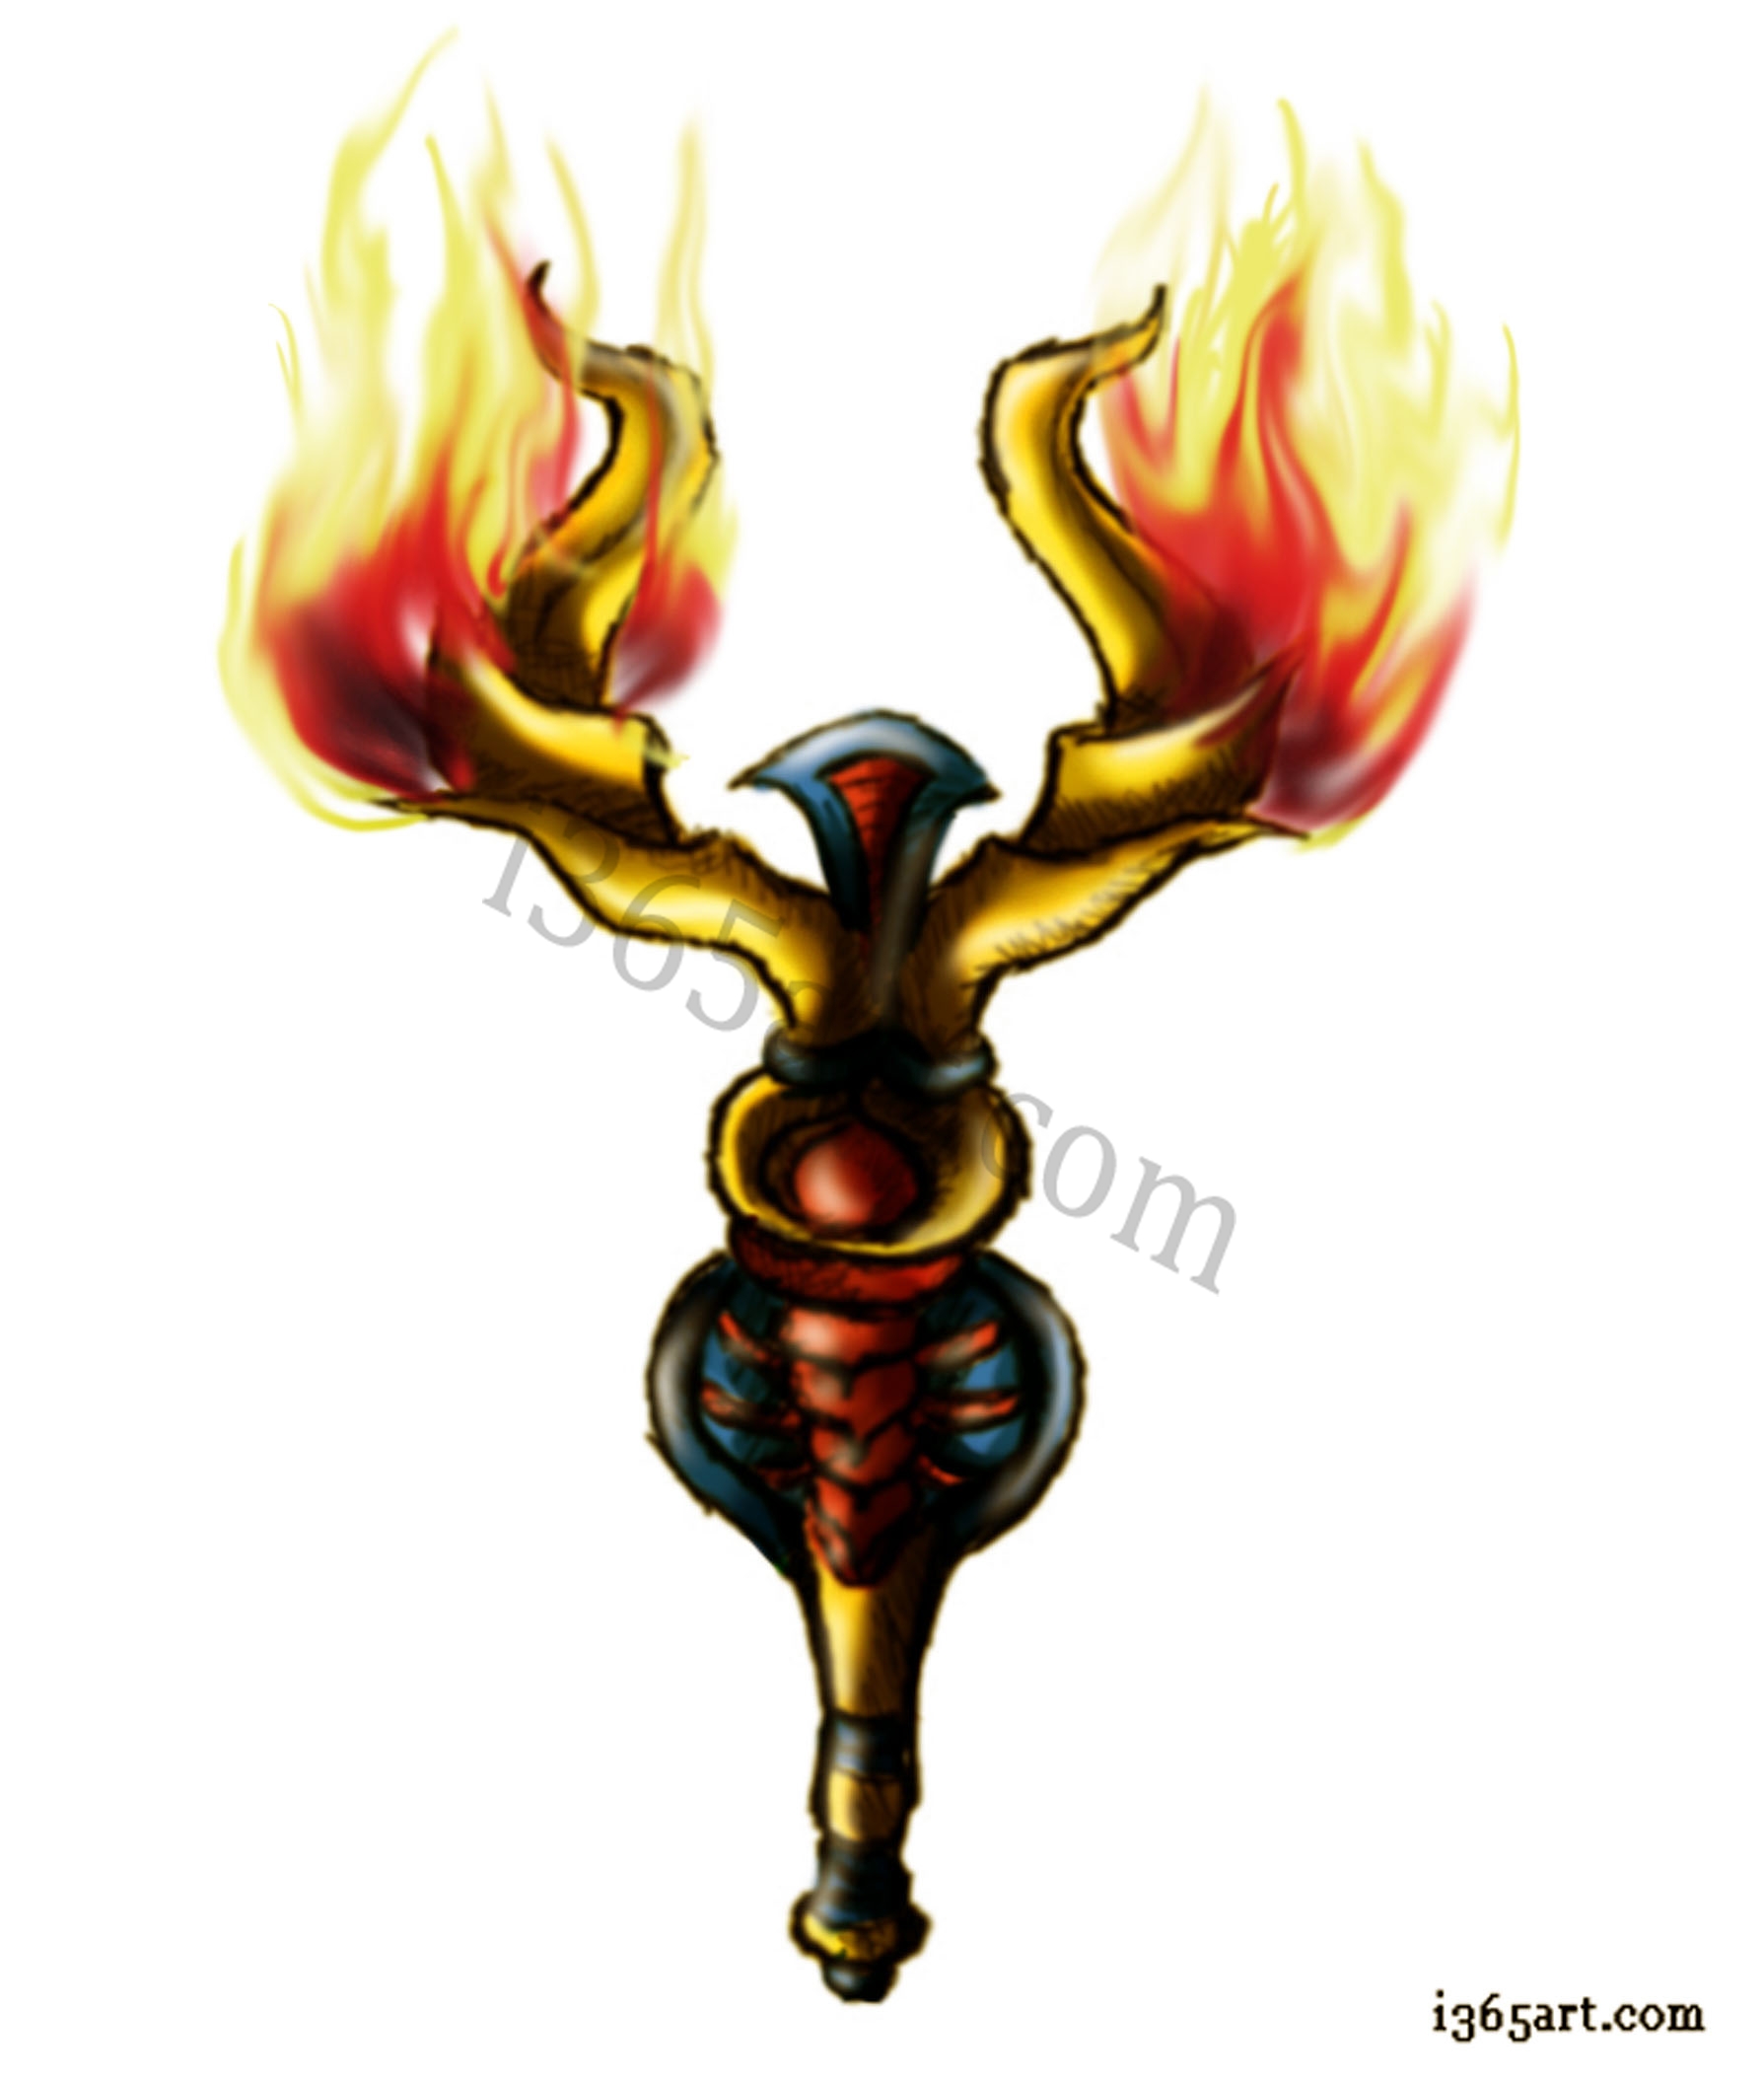 scepter drawing